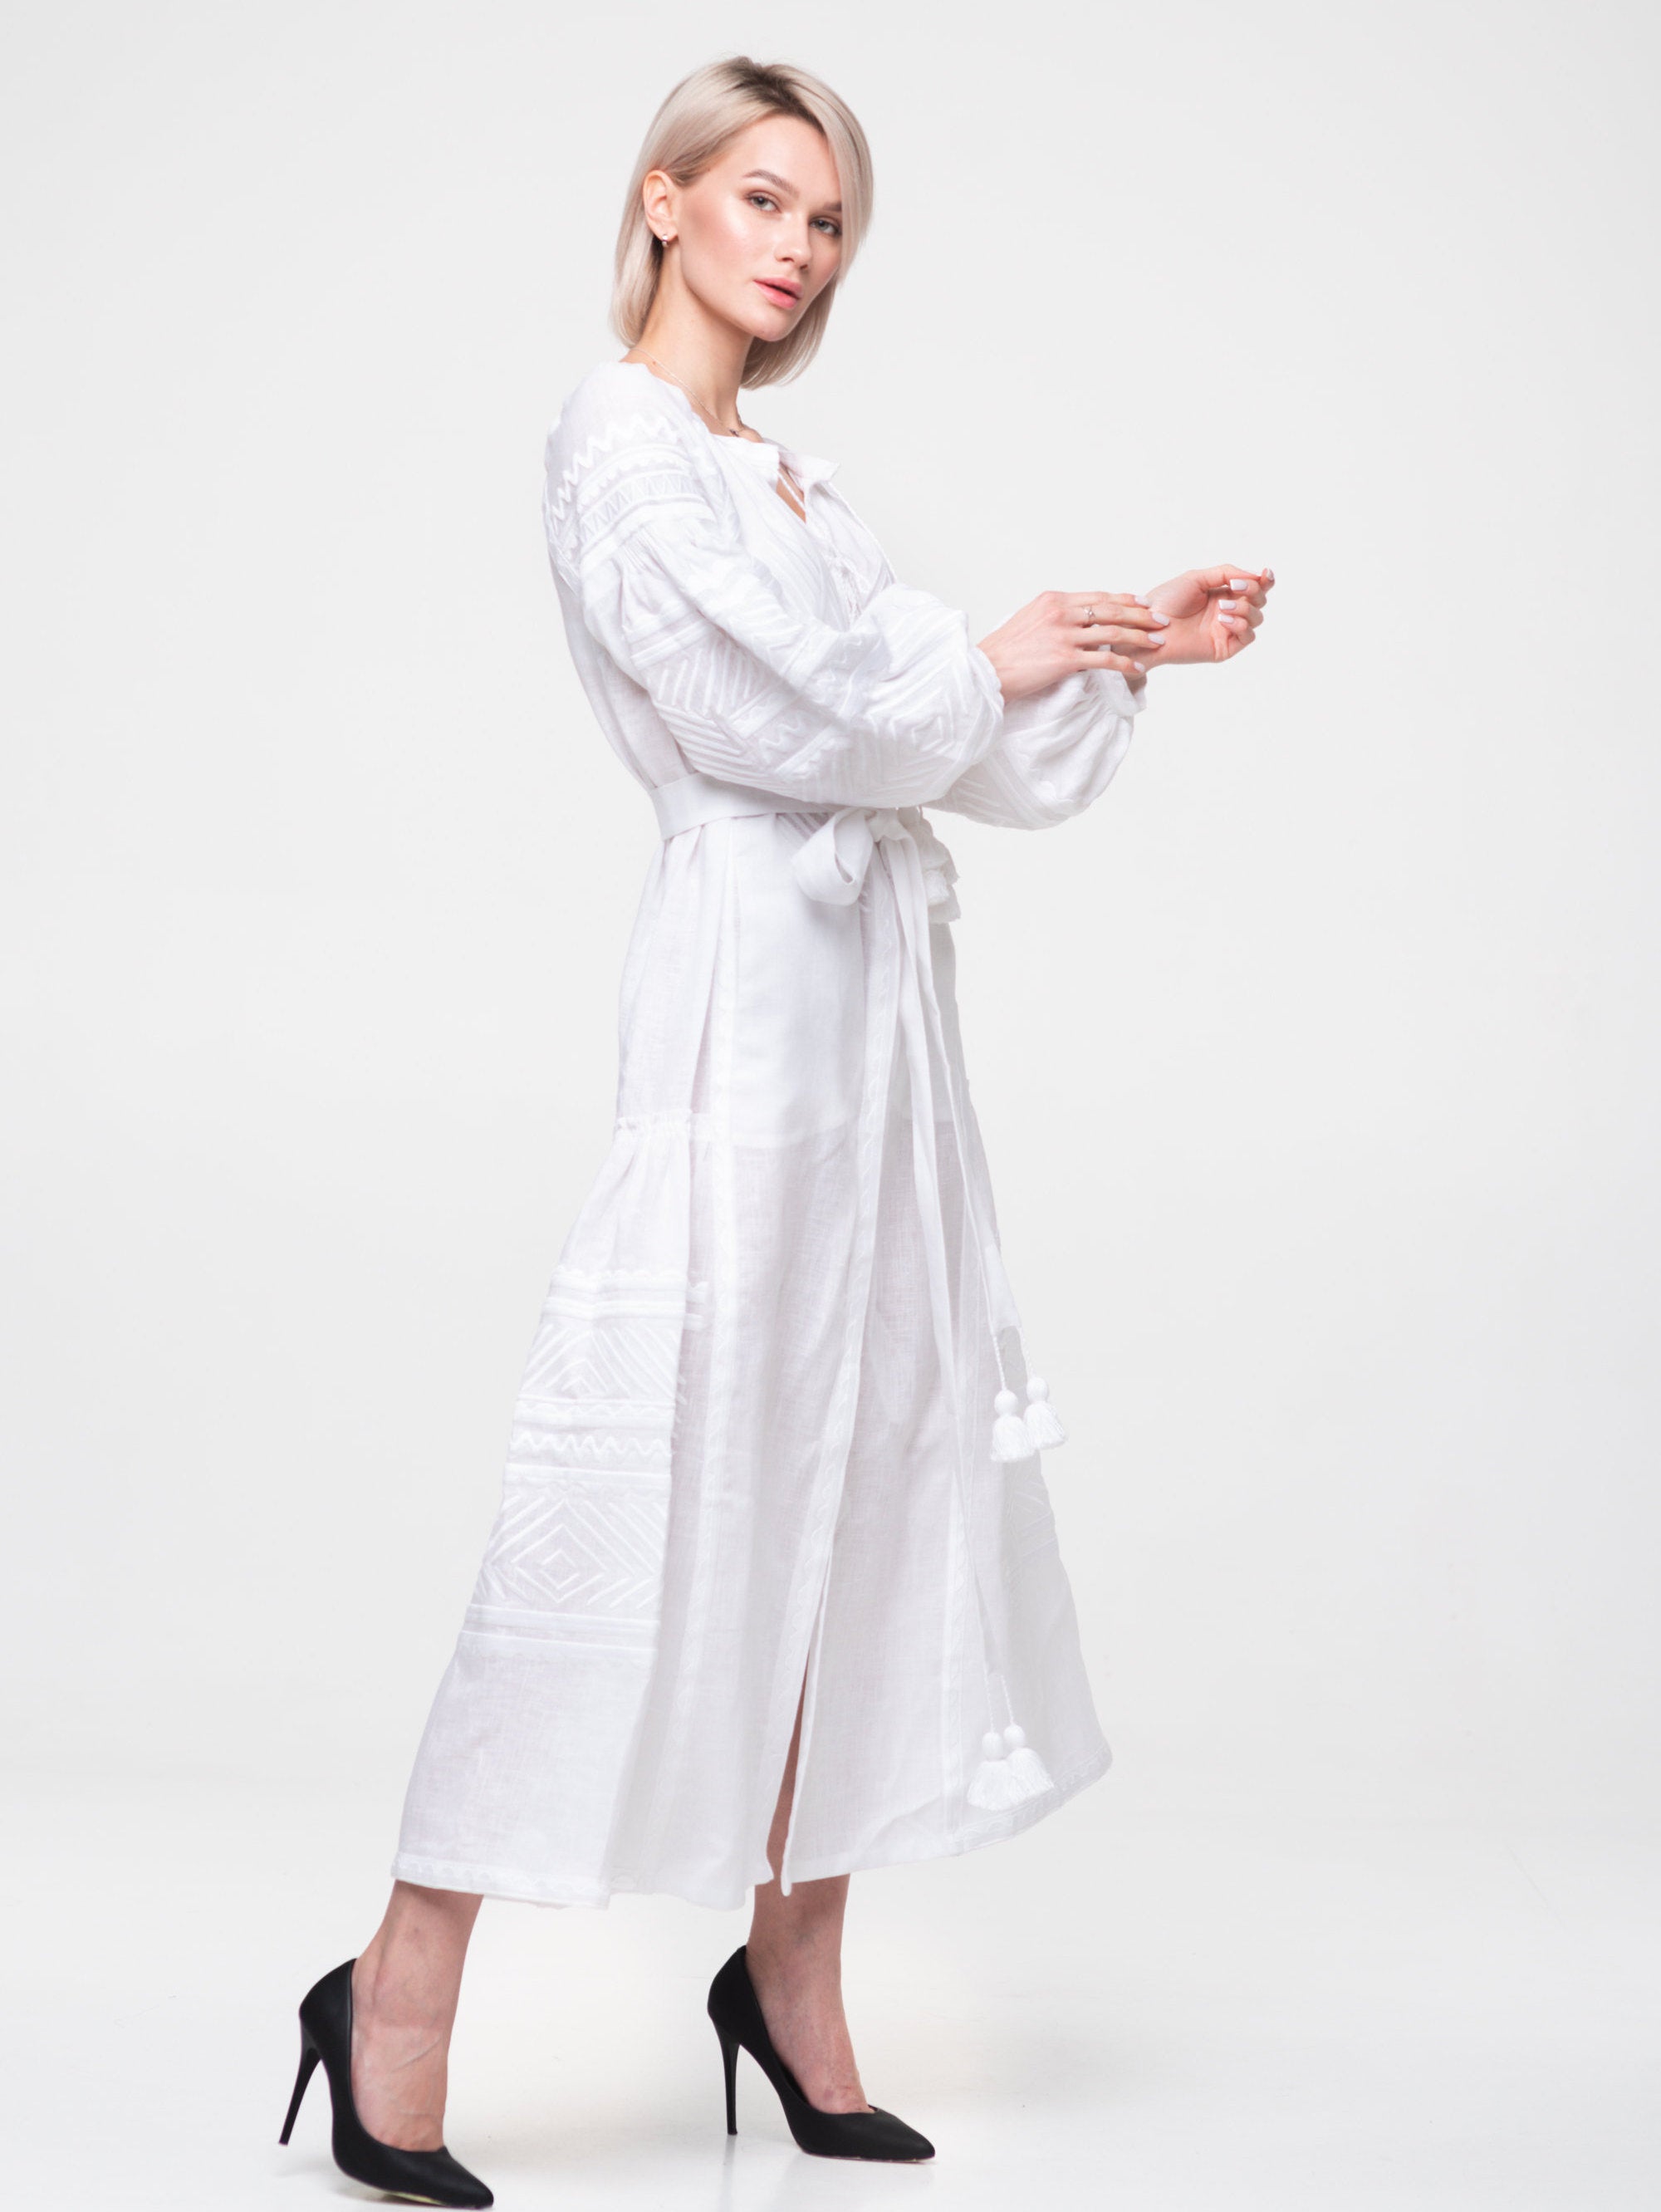 Embroidered white linen dress Ukrainian wedding outfit